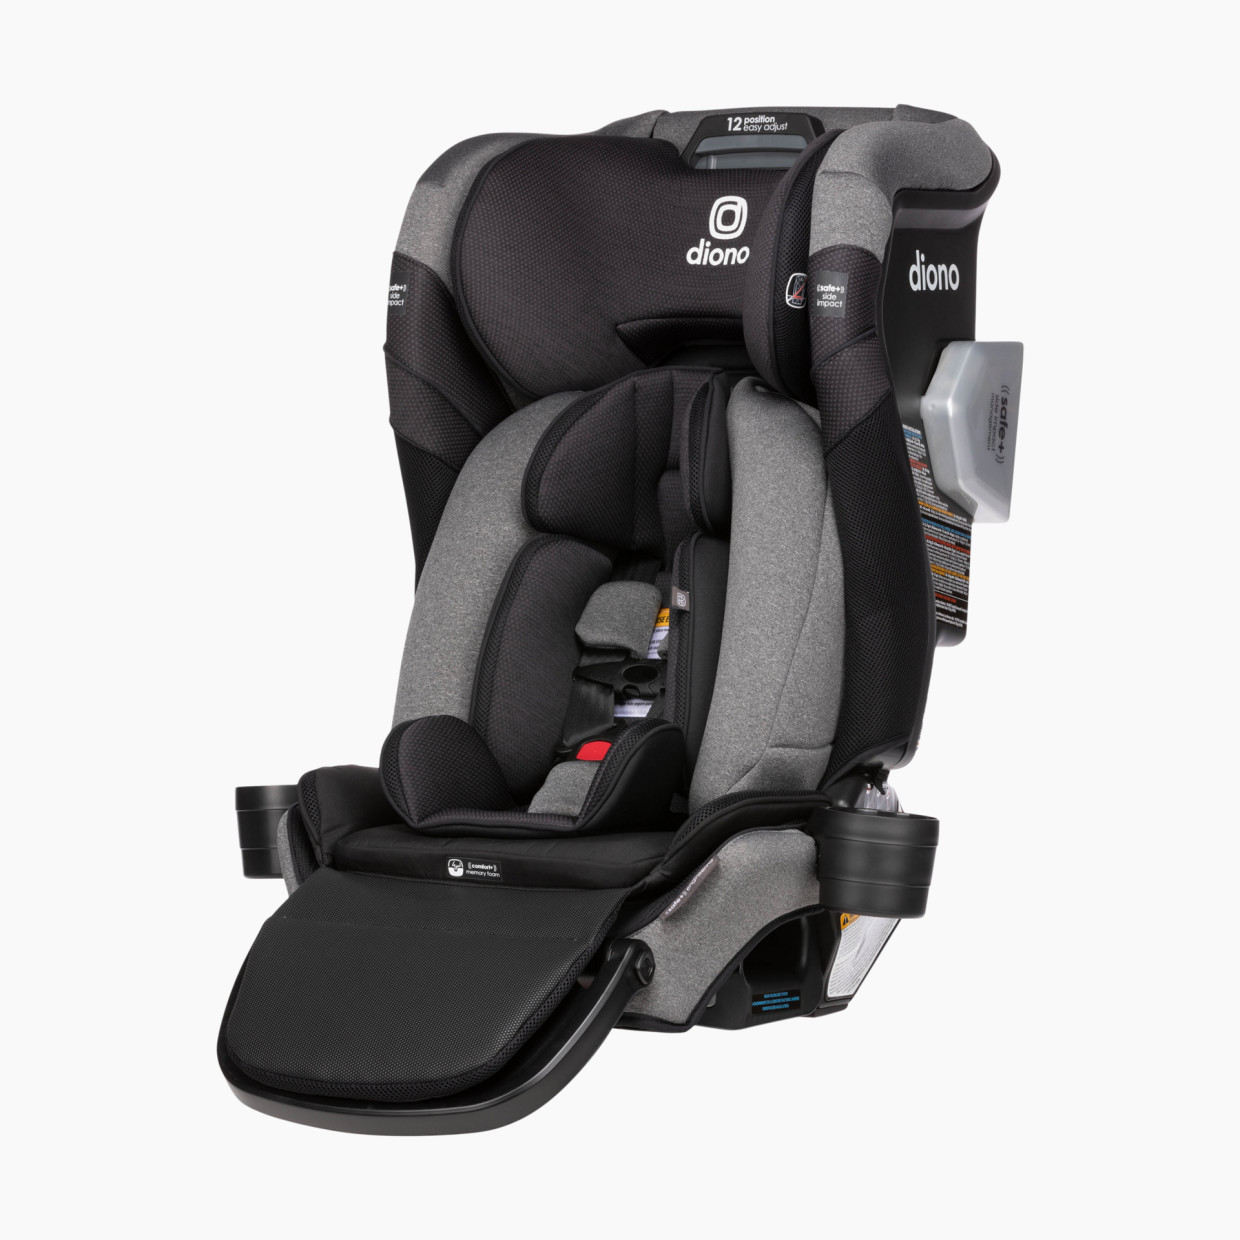 Diono Radian 3QXT+ FirstClass SafePlus All-in-One Convertible Car Seat - Black Jet.